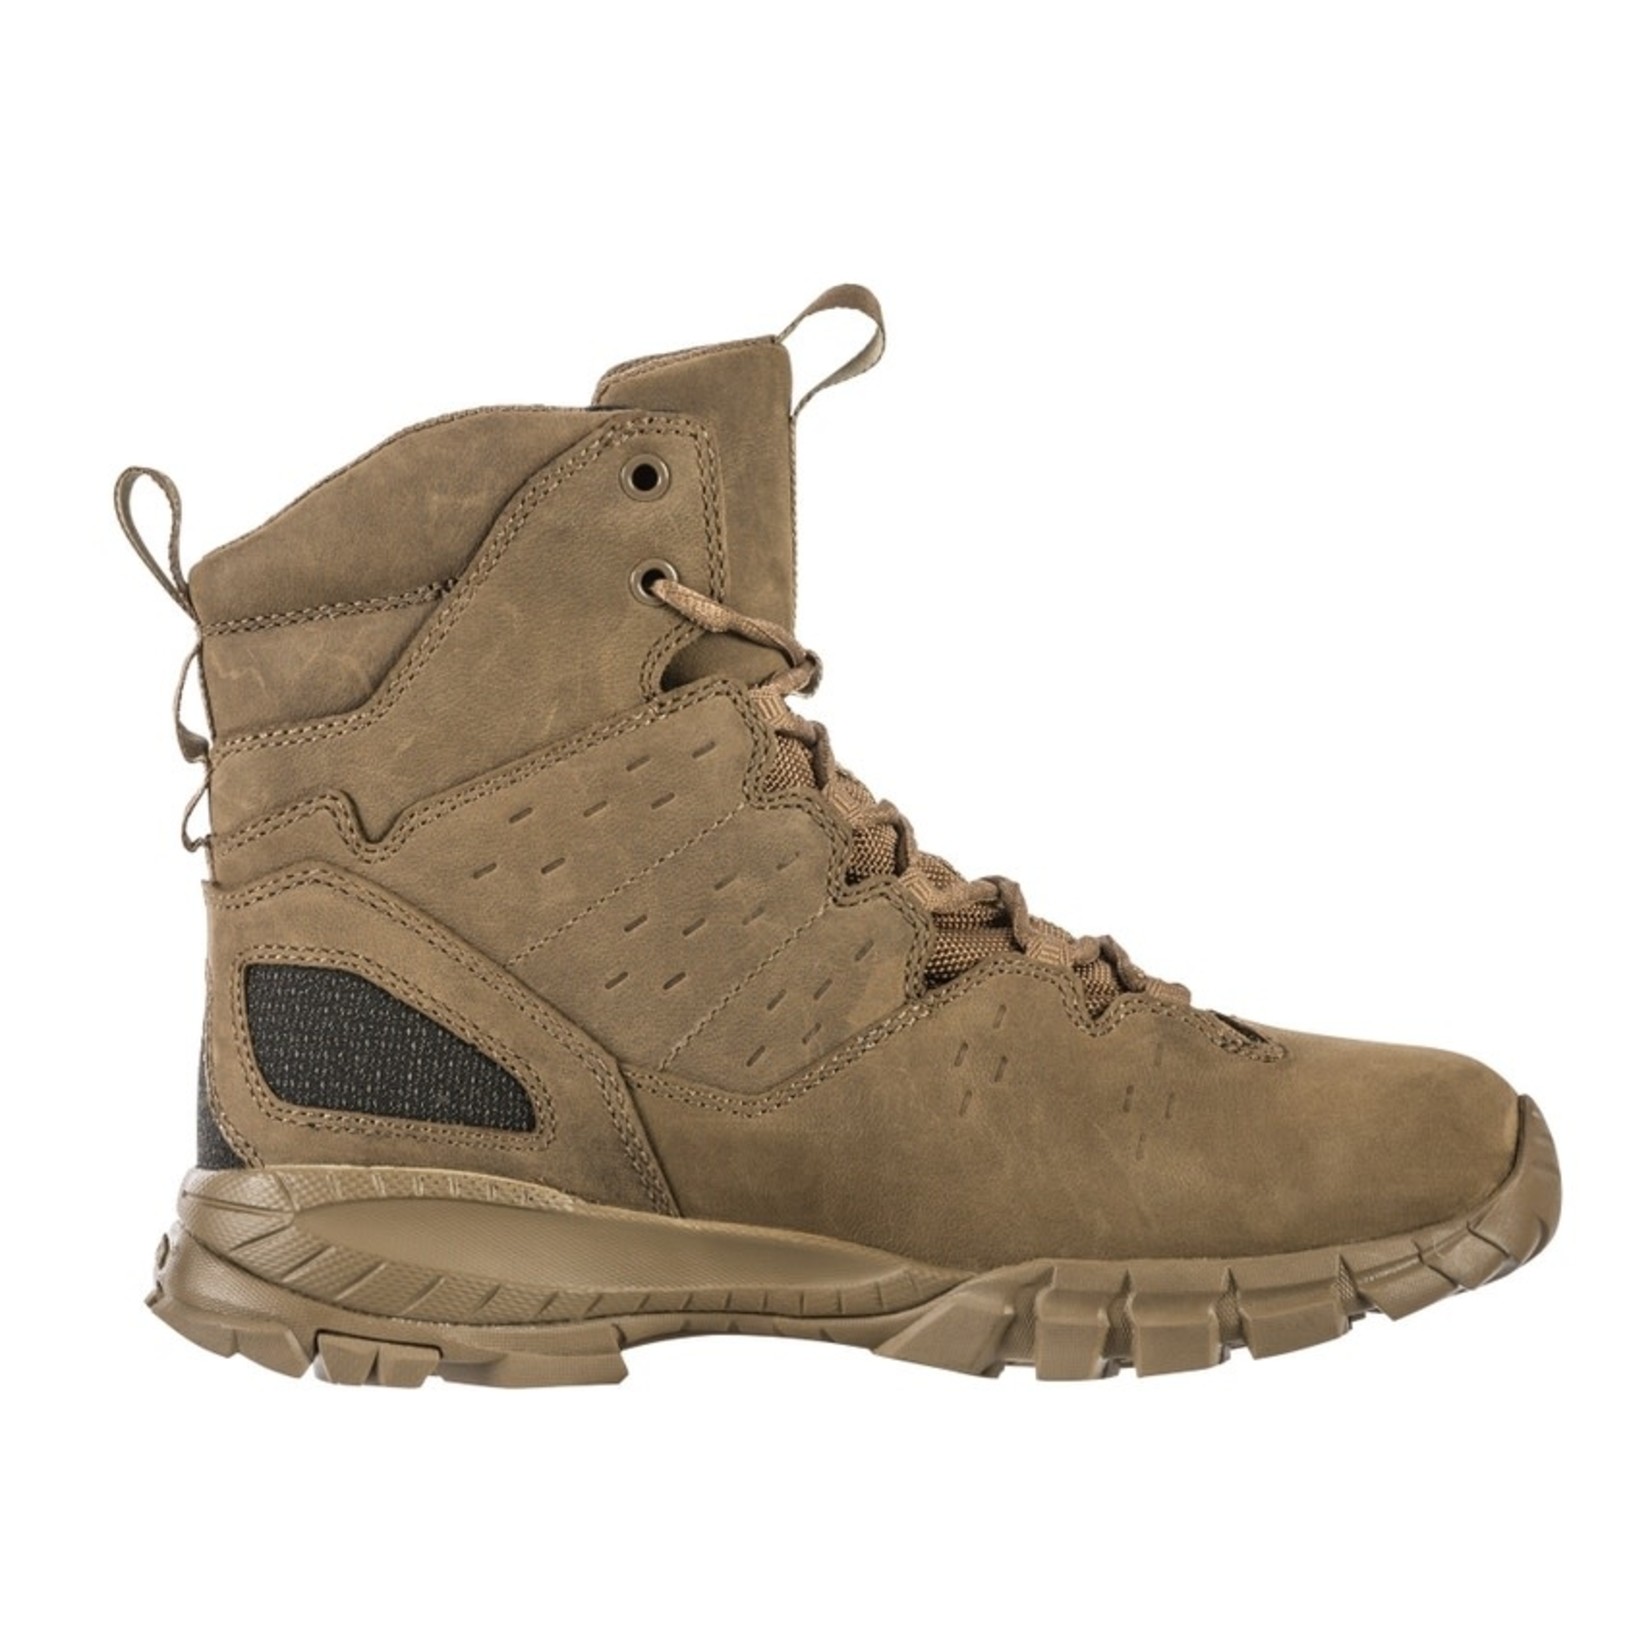 5.11 XPRT 3.0 WP 6" Boot Dark Coyote -10R